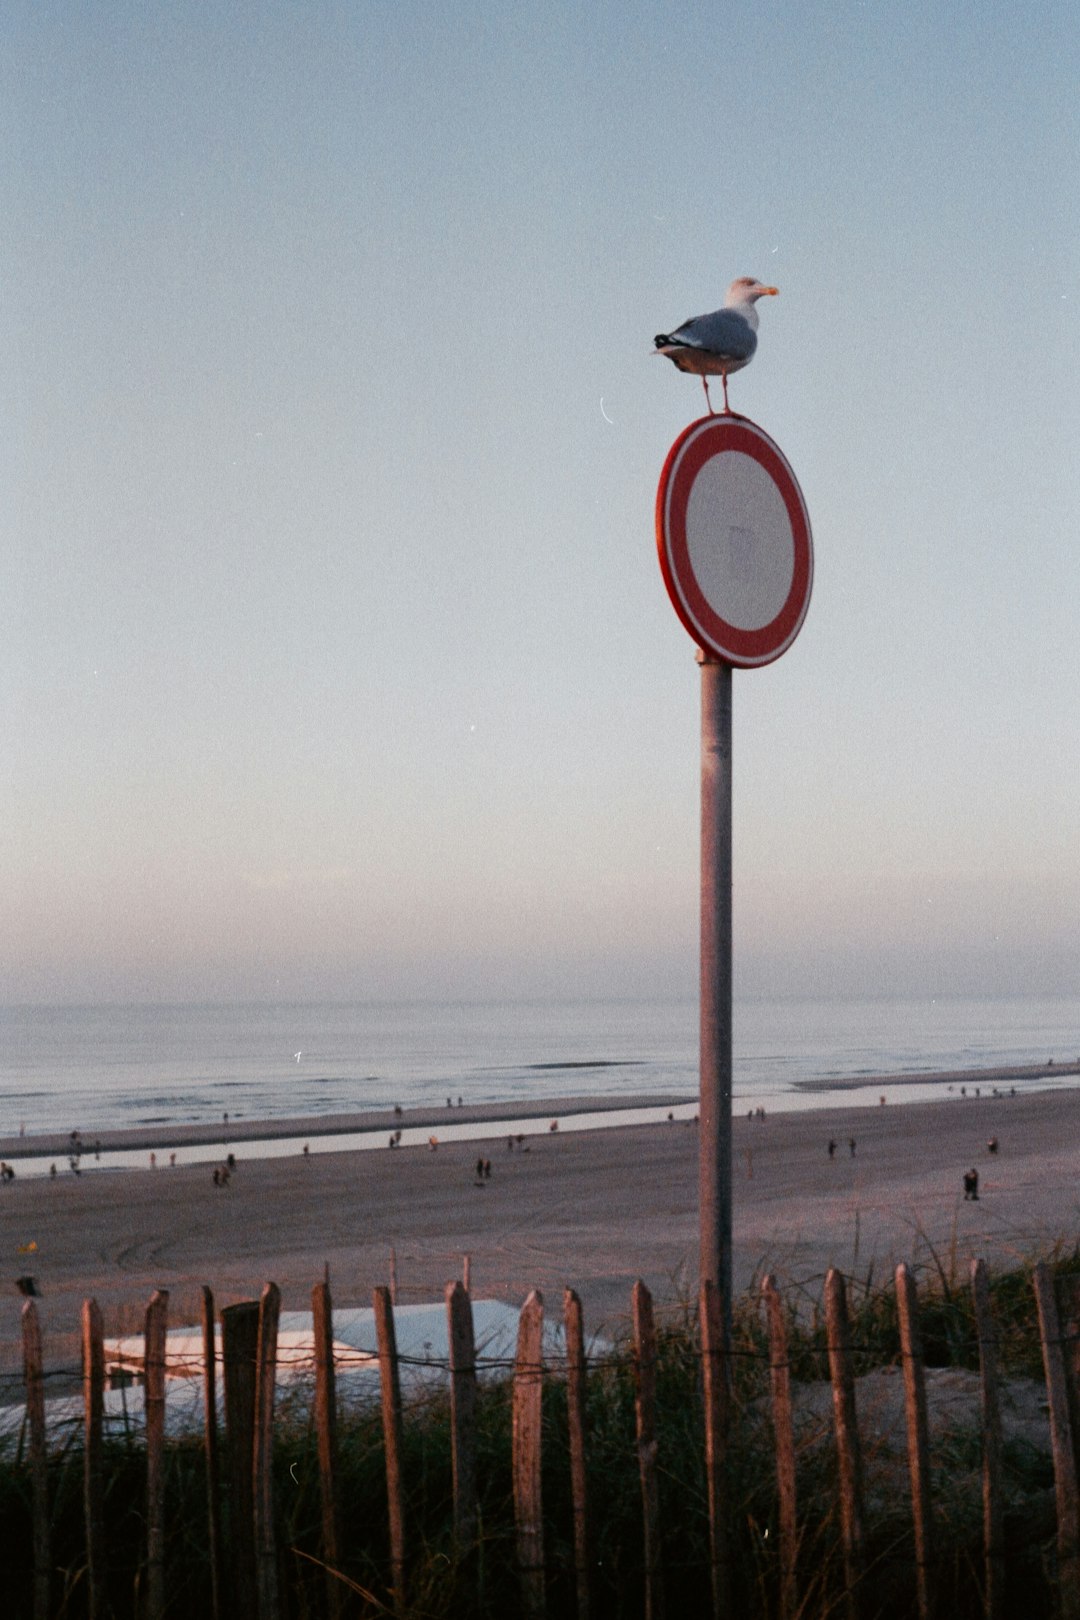 red and white basketball hoop near sea during daytime